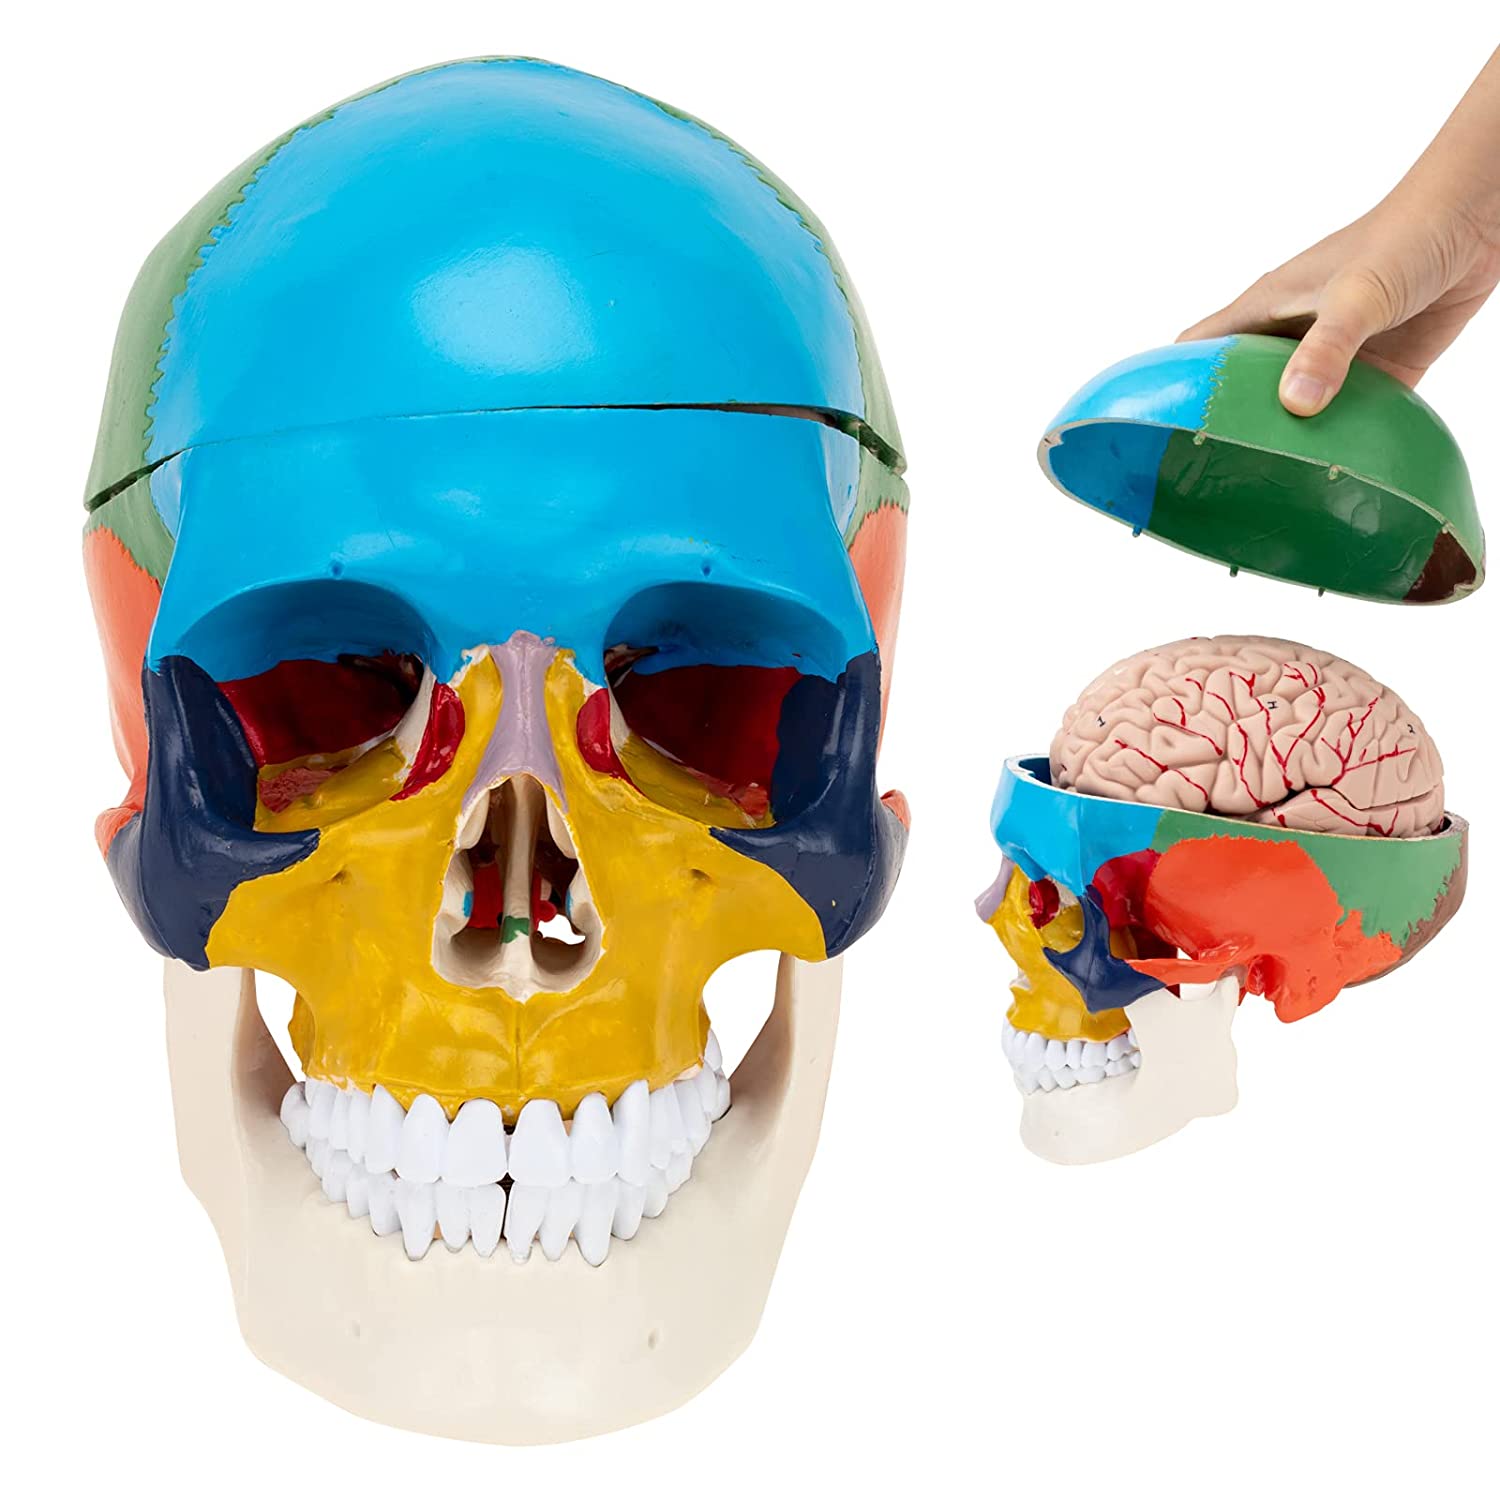 Human Skull with Brain Anatomical Model 8-Part Life-Size Anatomy for  Science Classroom Study Display Teaching Medical Model